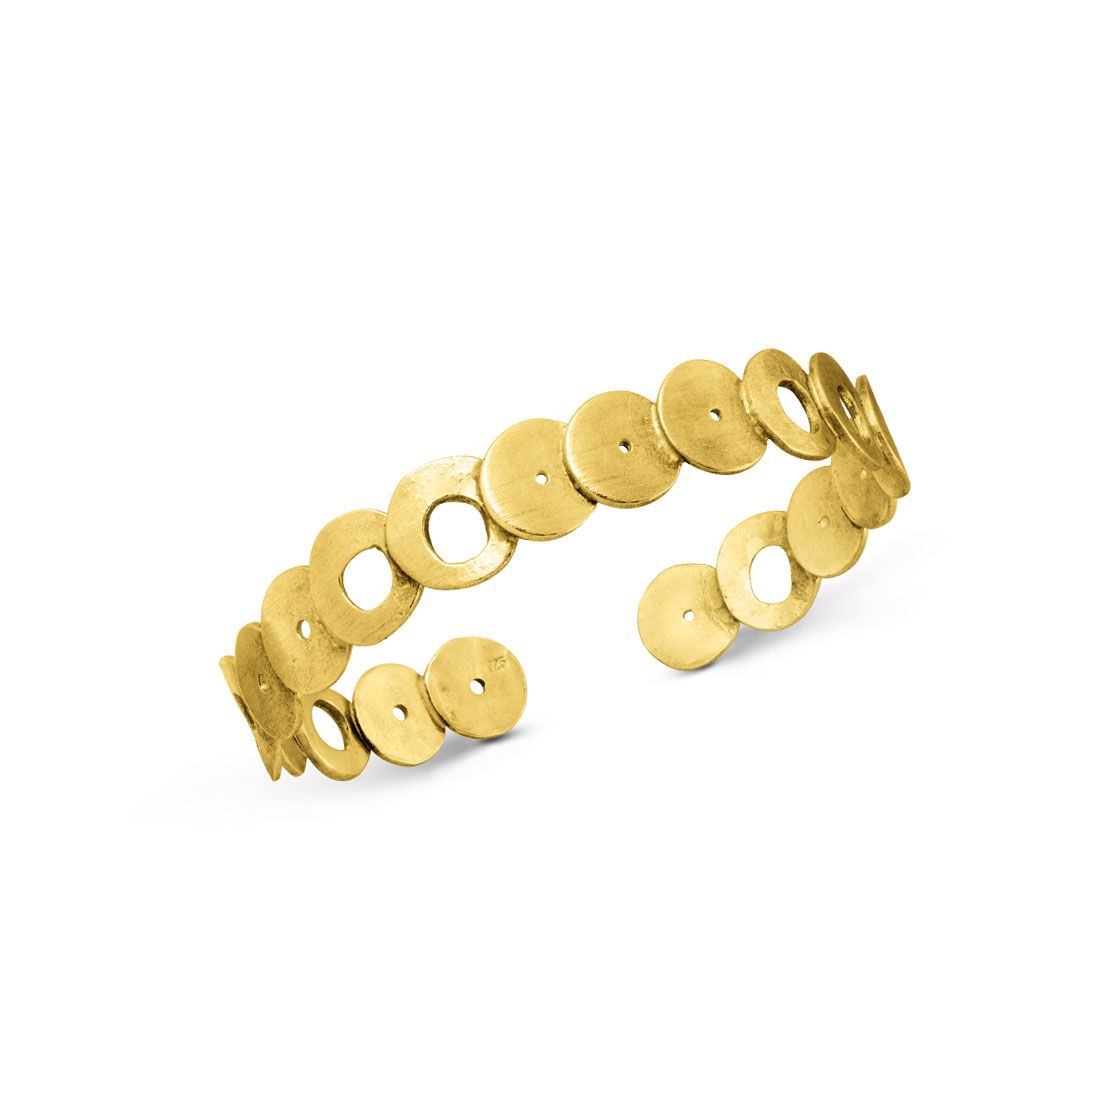 Gold cuff bracelet with handmade asymmetrical circles. Easy to adjust on every wrist.